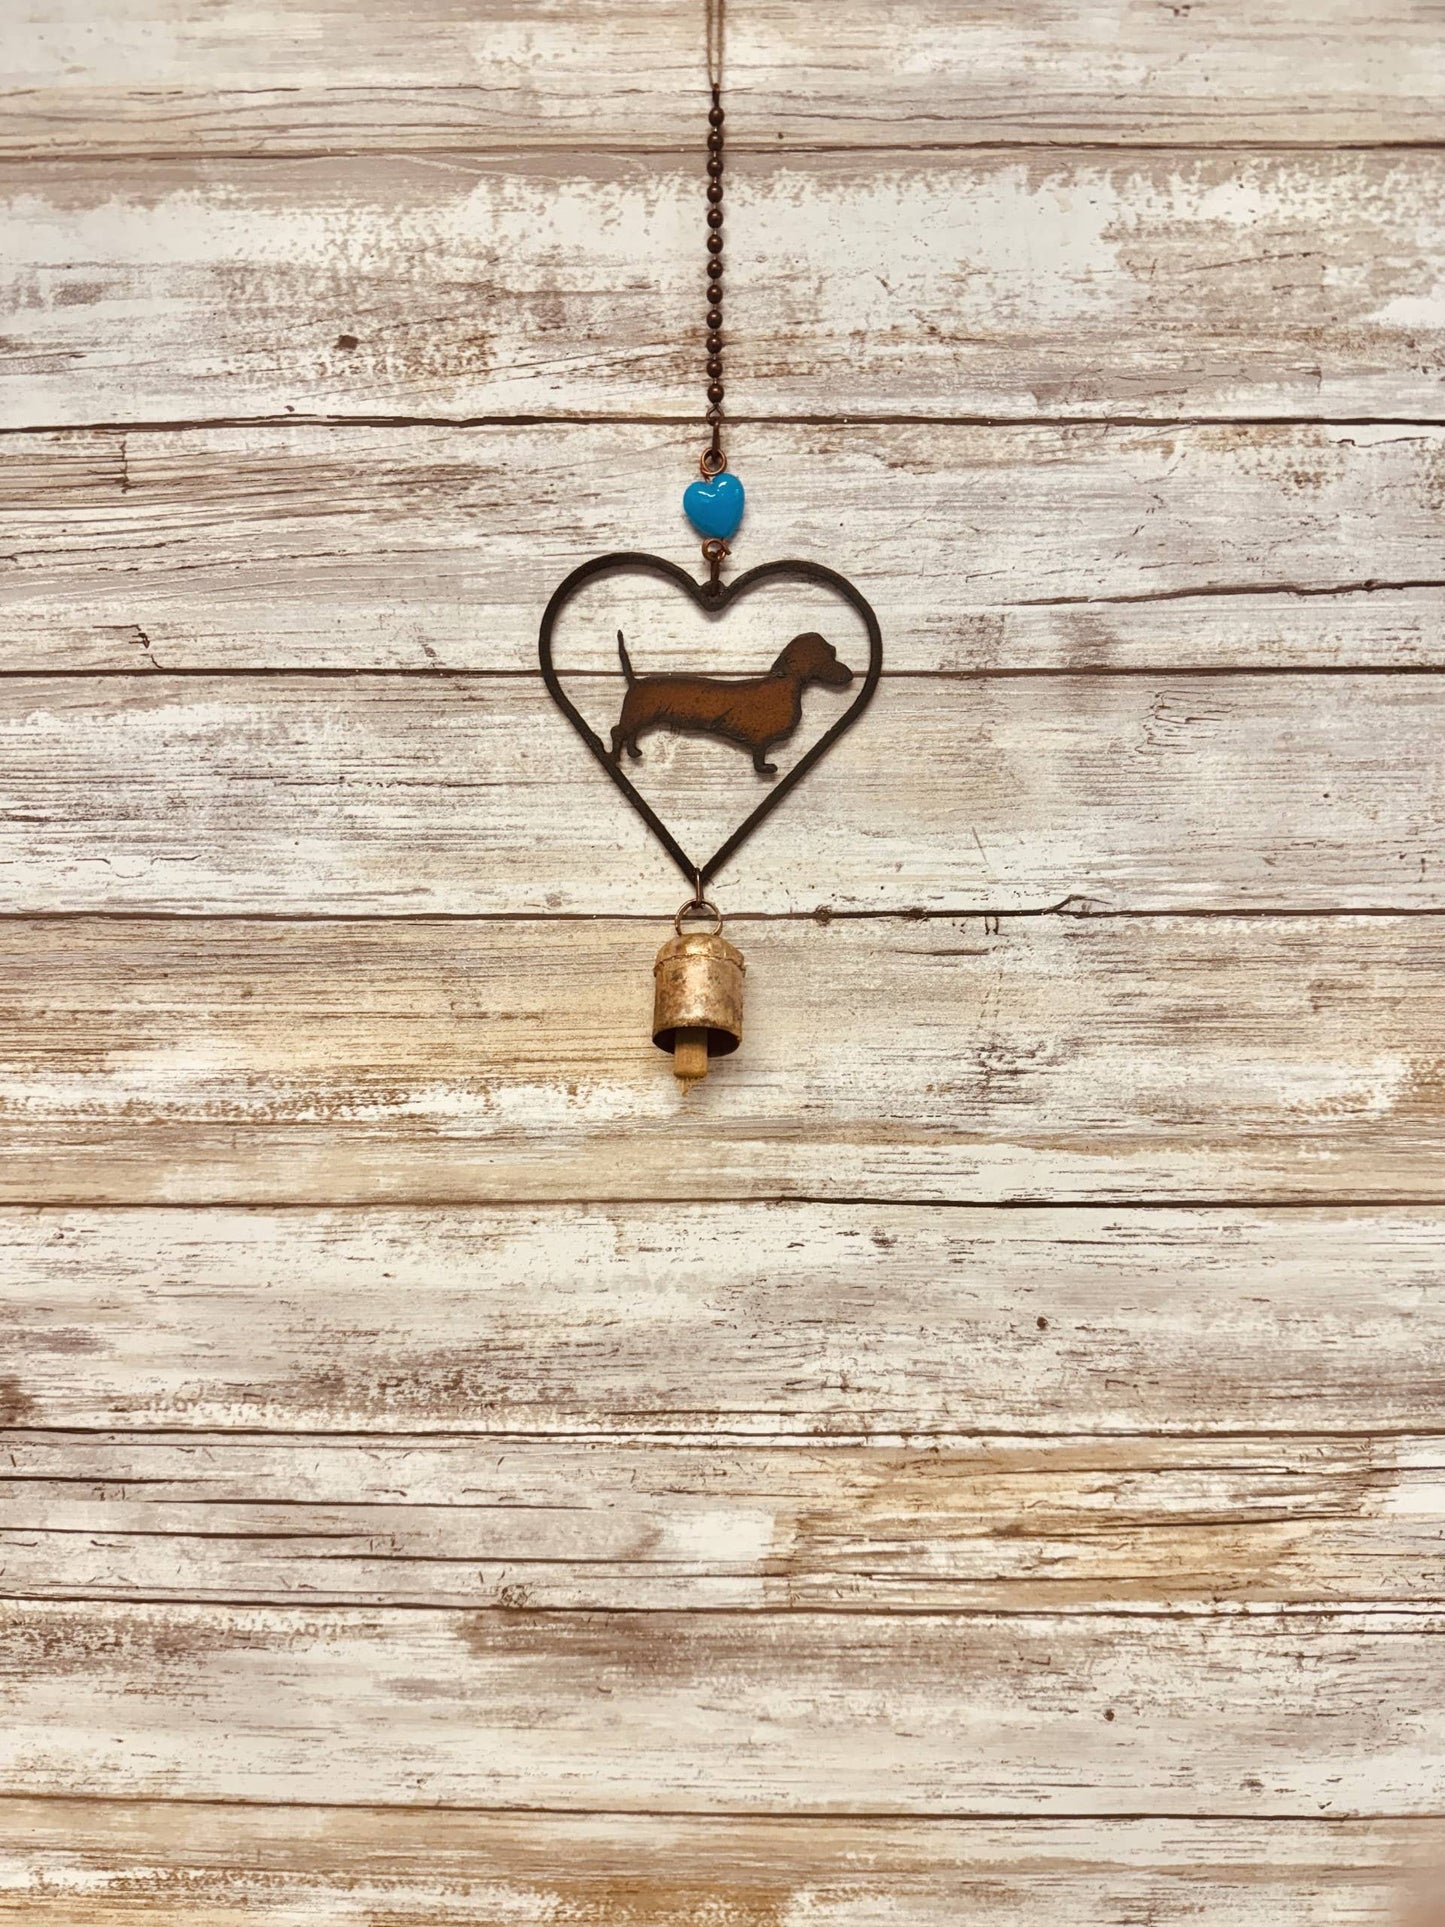 Heart Outline with Dachshund Rustic Metal Garden Bell Chime